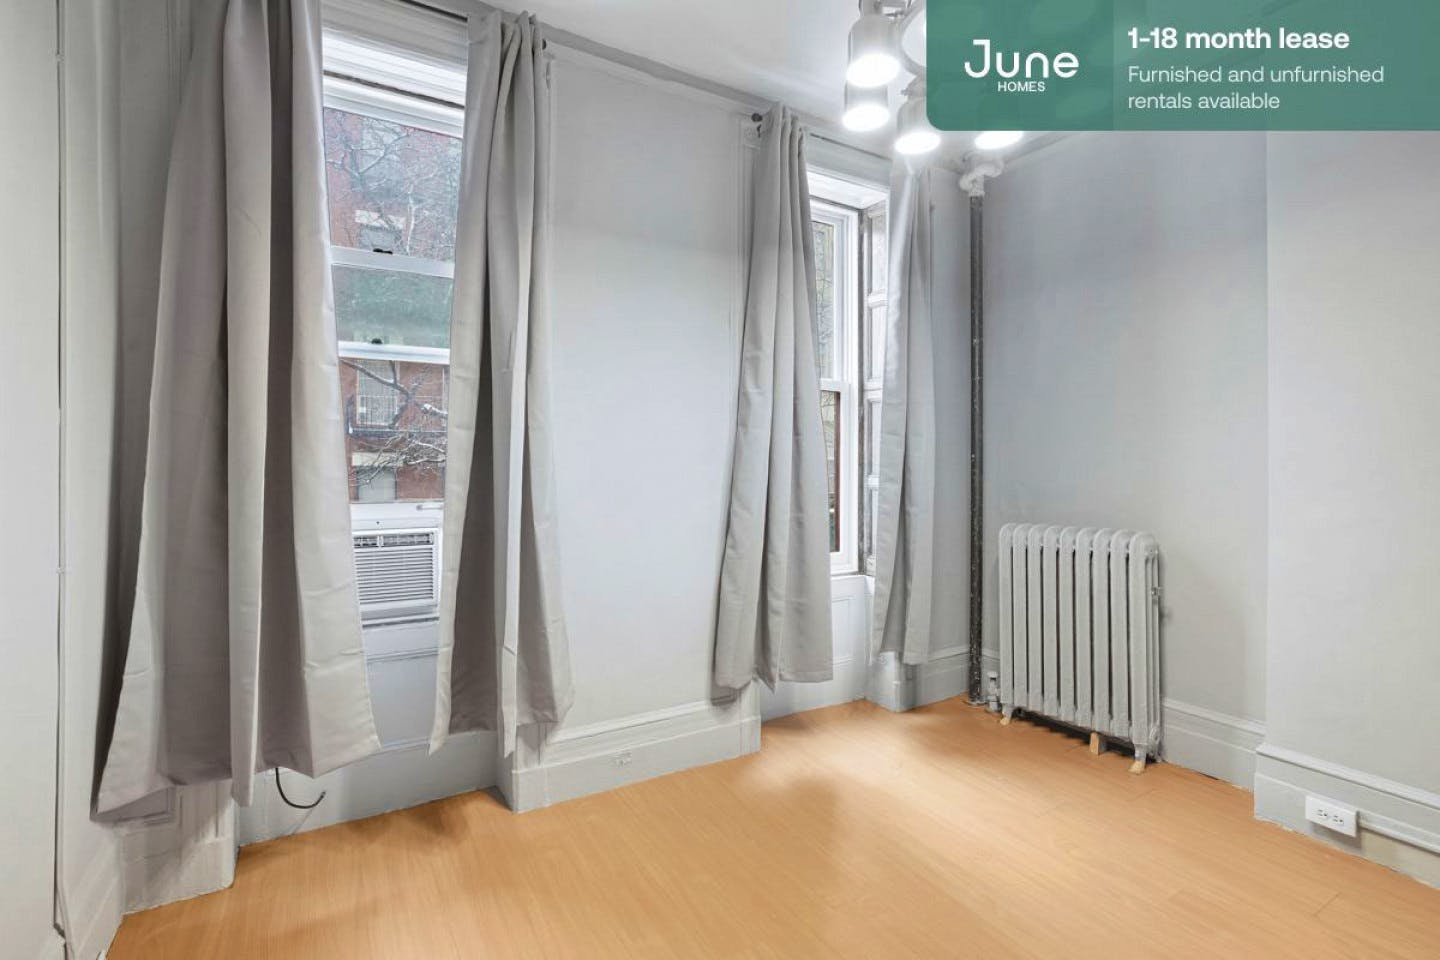 #386 Queen room in Hell's Kitchen 4-bed / 1.0-bath apartment